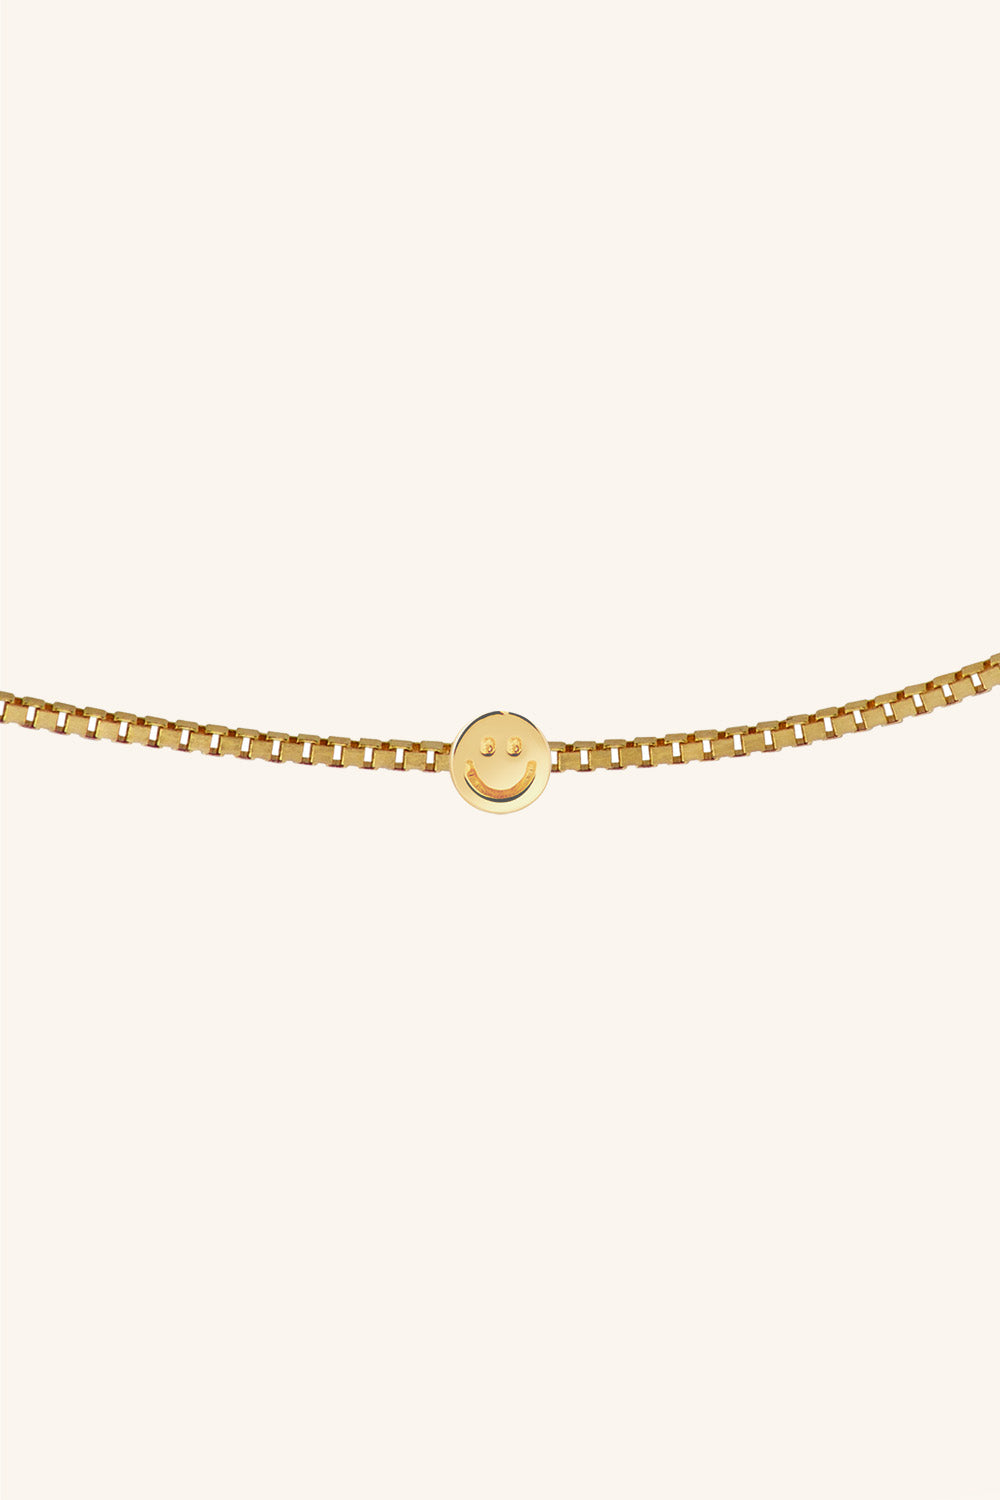 The Mini Goldie Smiley Chain